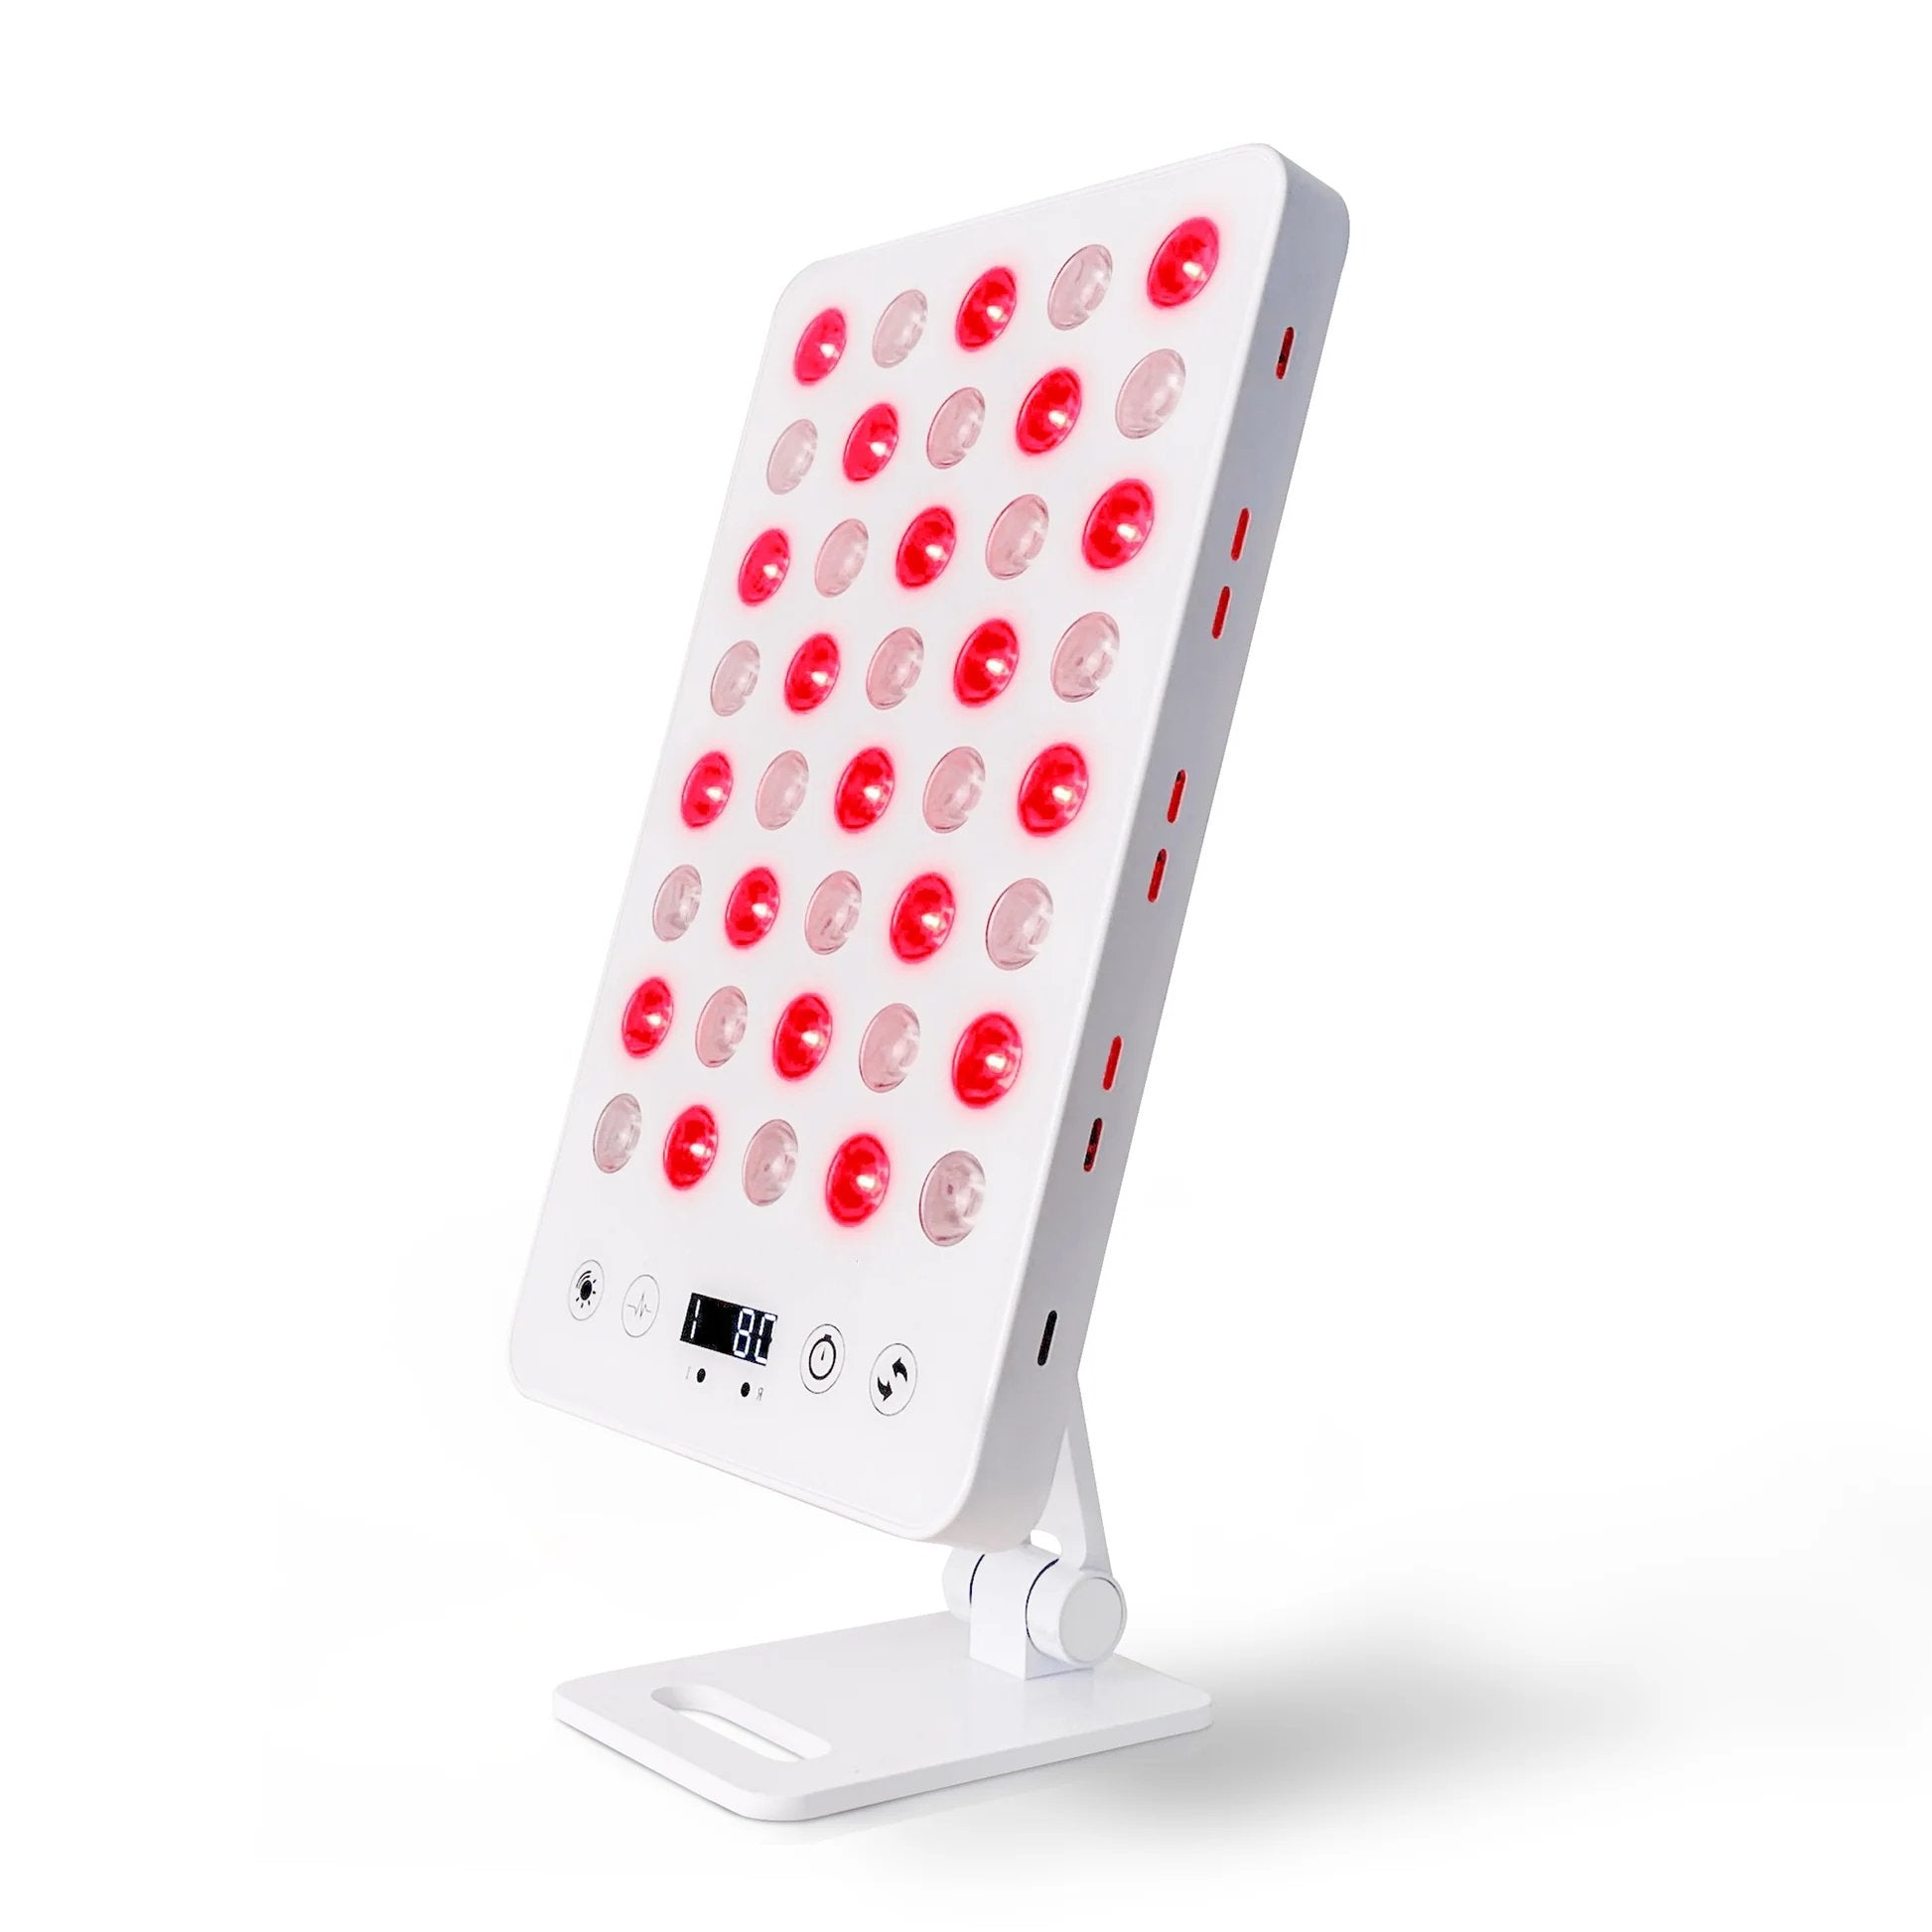 PeakMe 200W Red Light Therapy Panel - Portable & Powerful by PeakMe, SKU DP-LED-001